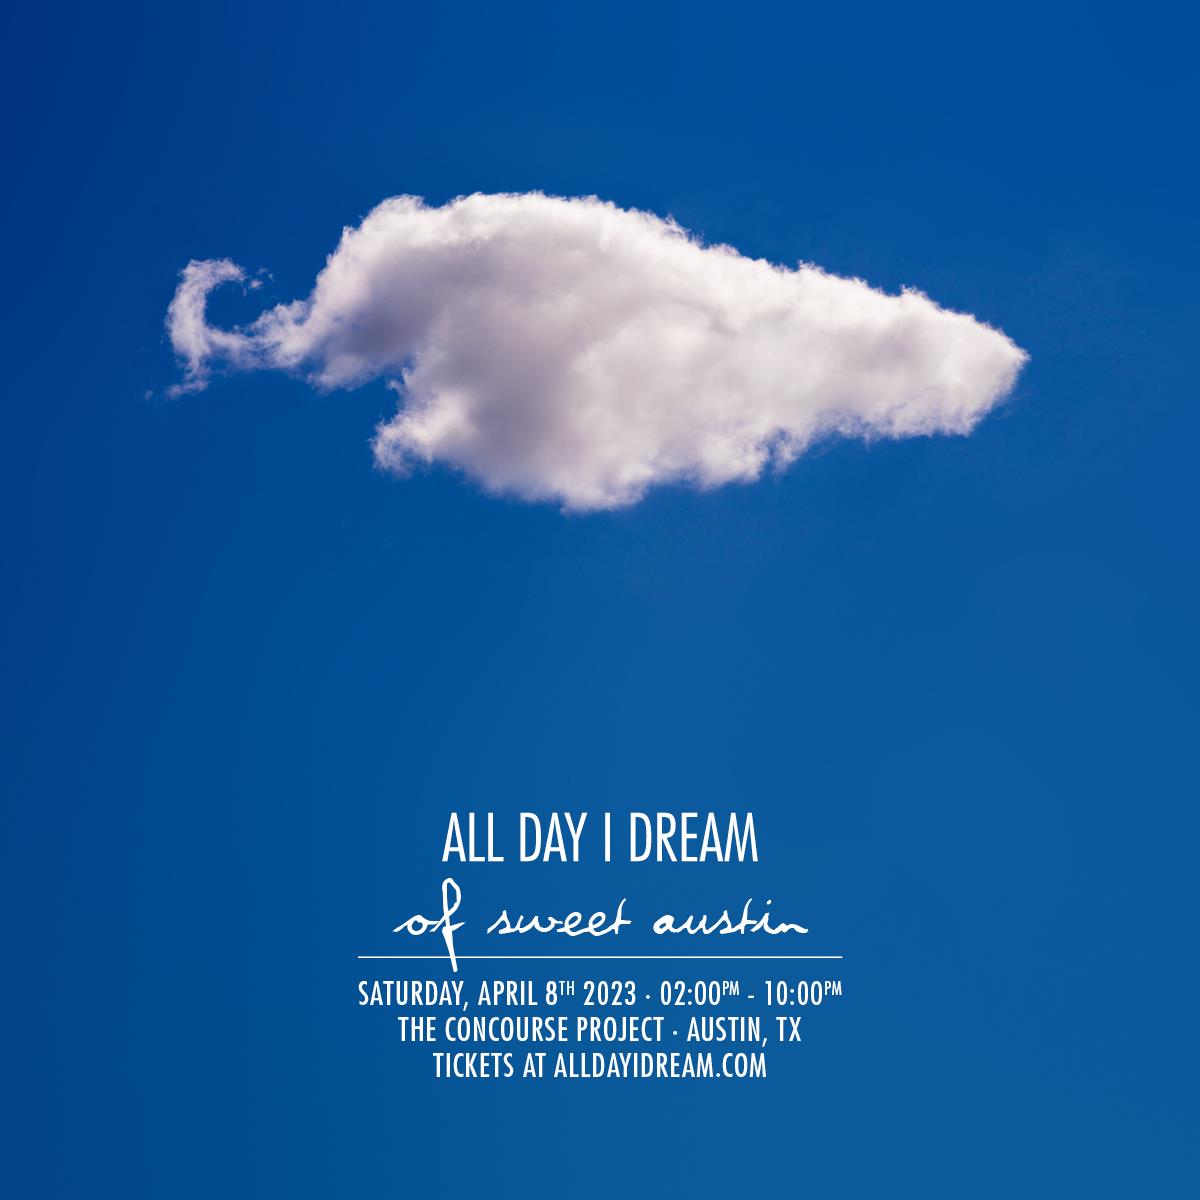 All Day I Dream at The Concourse Project (Outdoors)